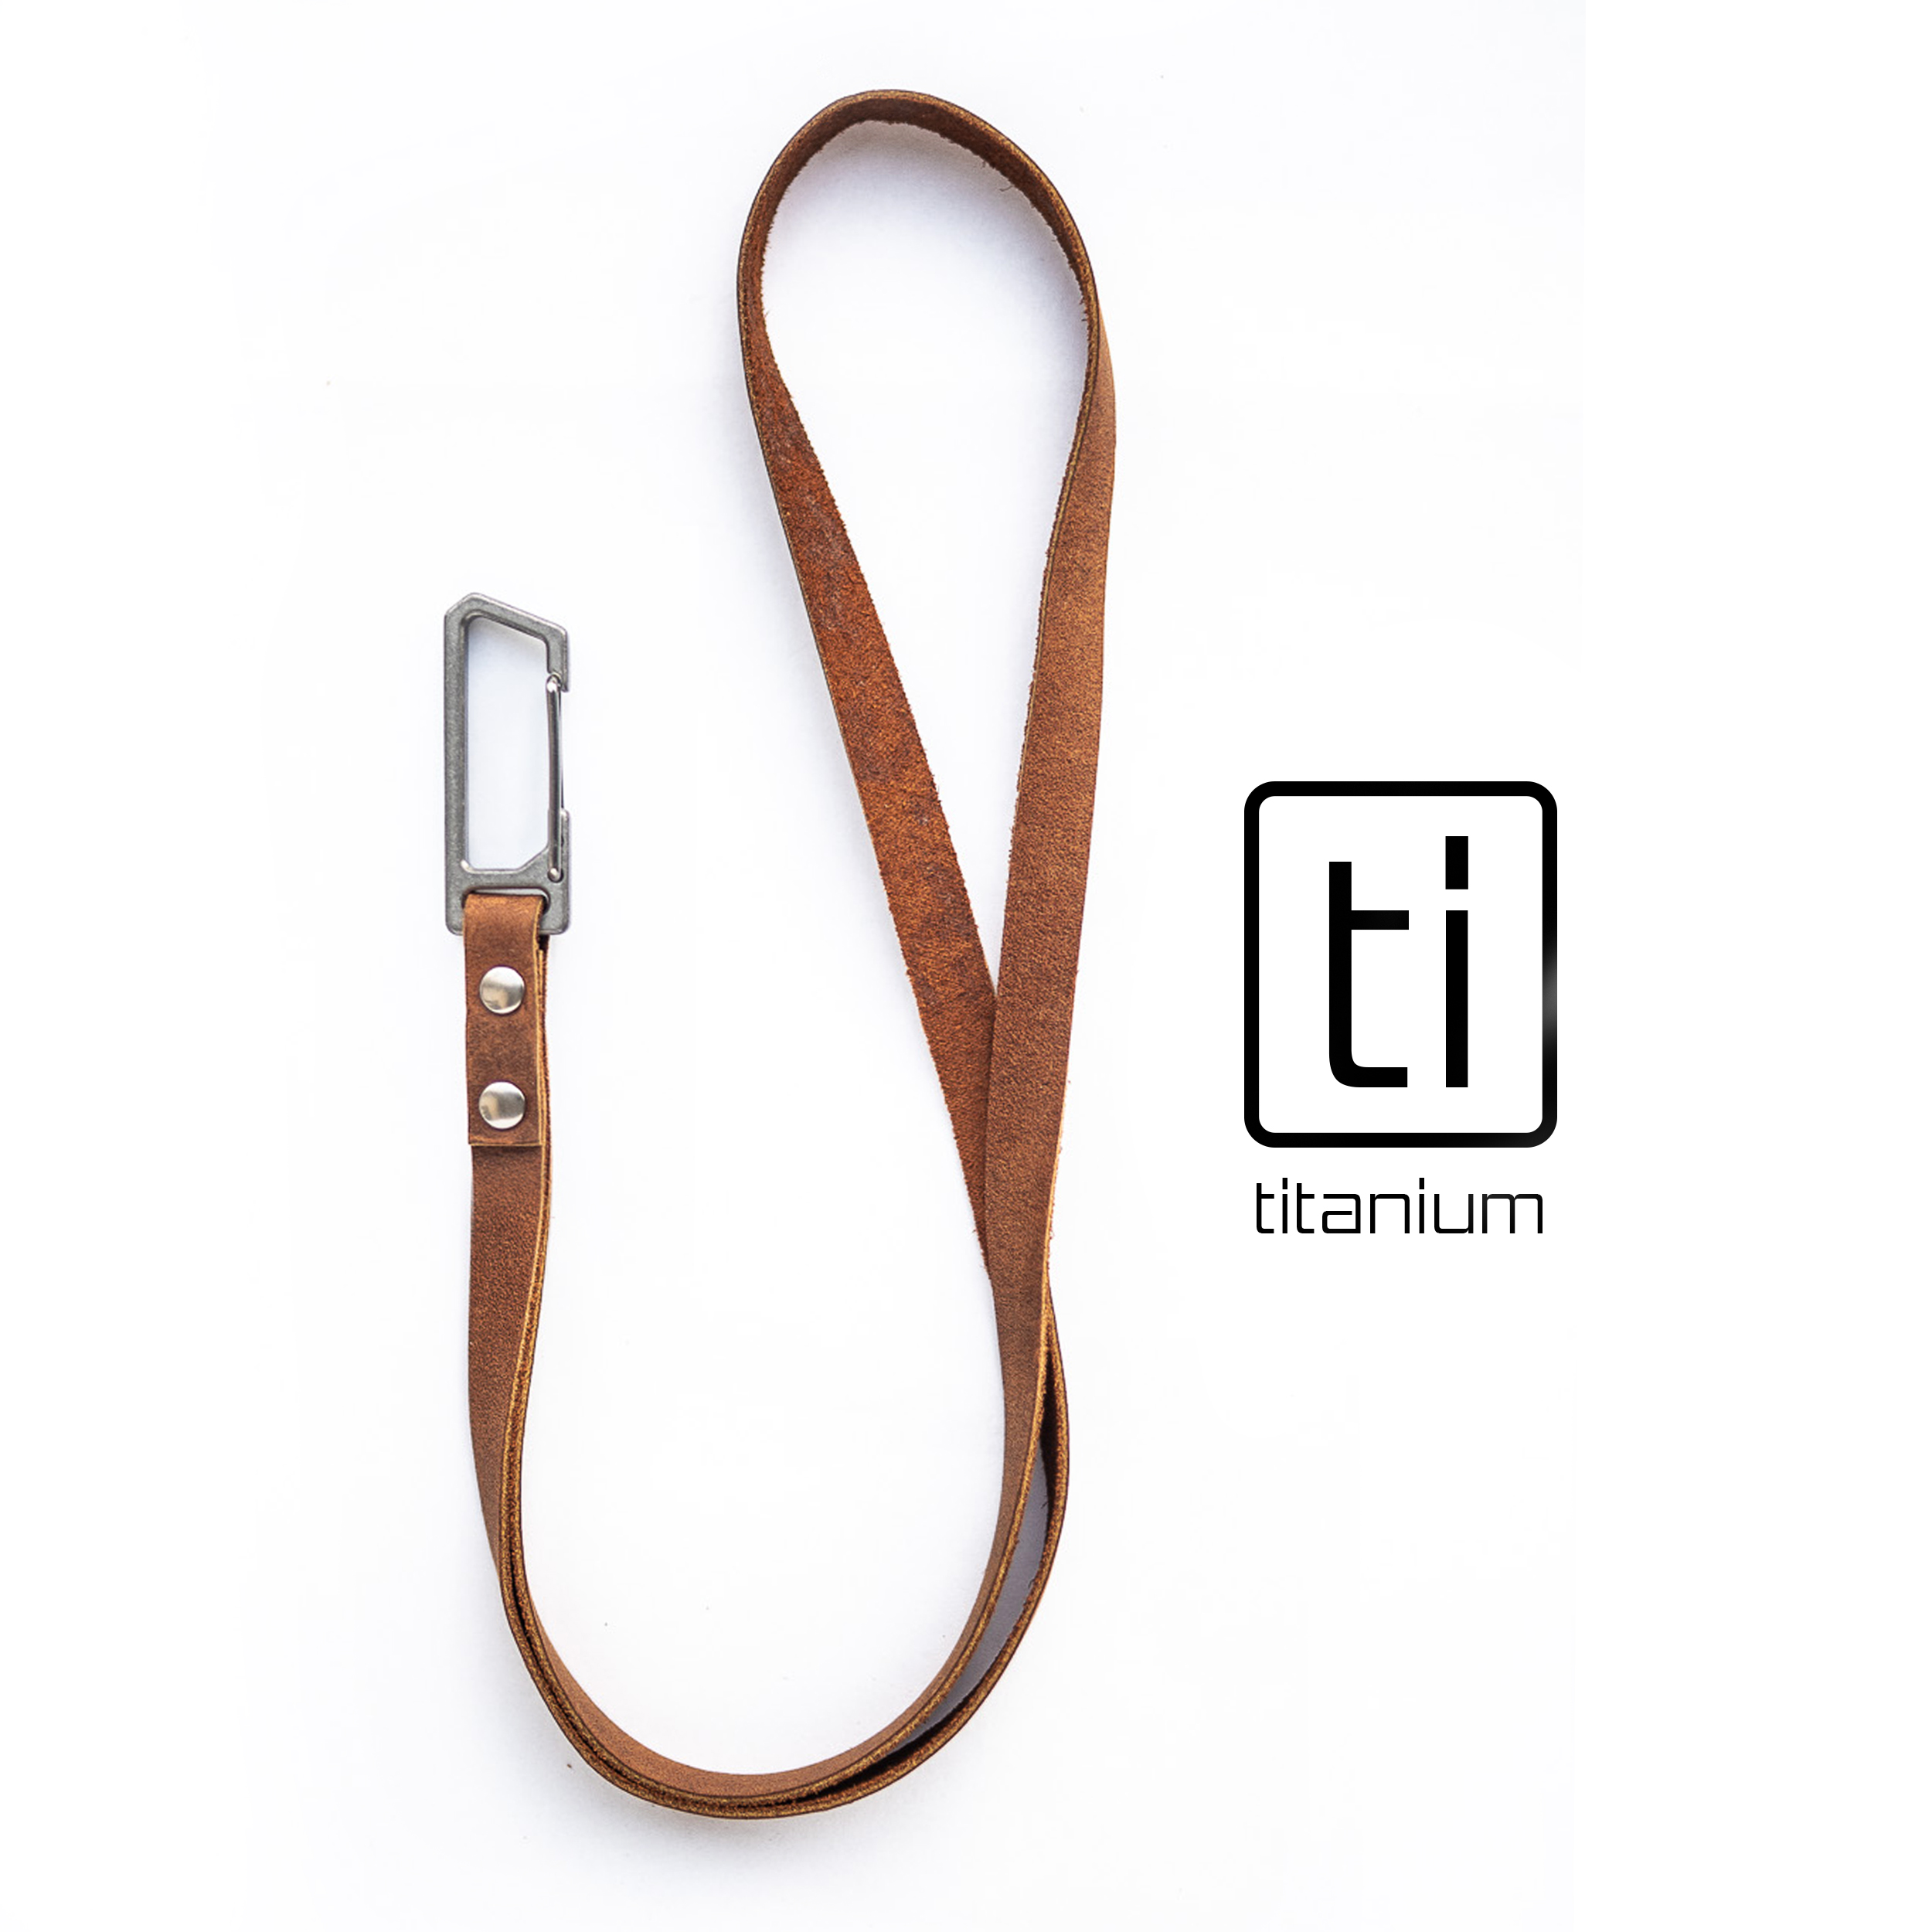 Russet-Brown Tirant Latch 17 Leather Neck Lanyard w/Titanium Carabiner for Keys & Accessories (Made in Usa)